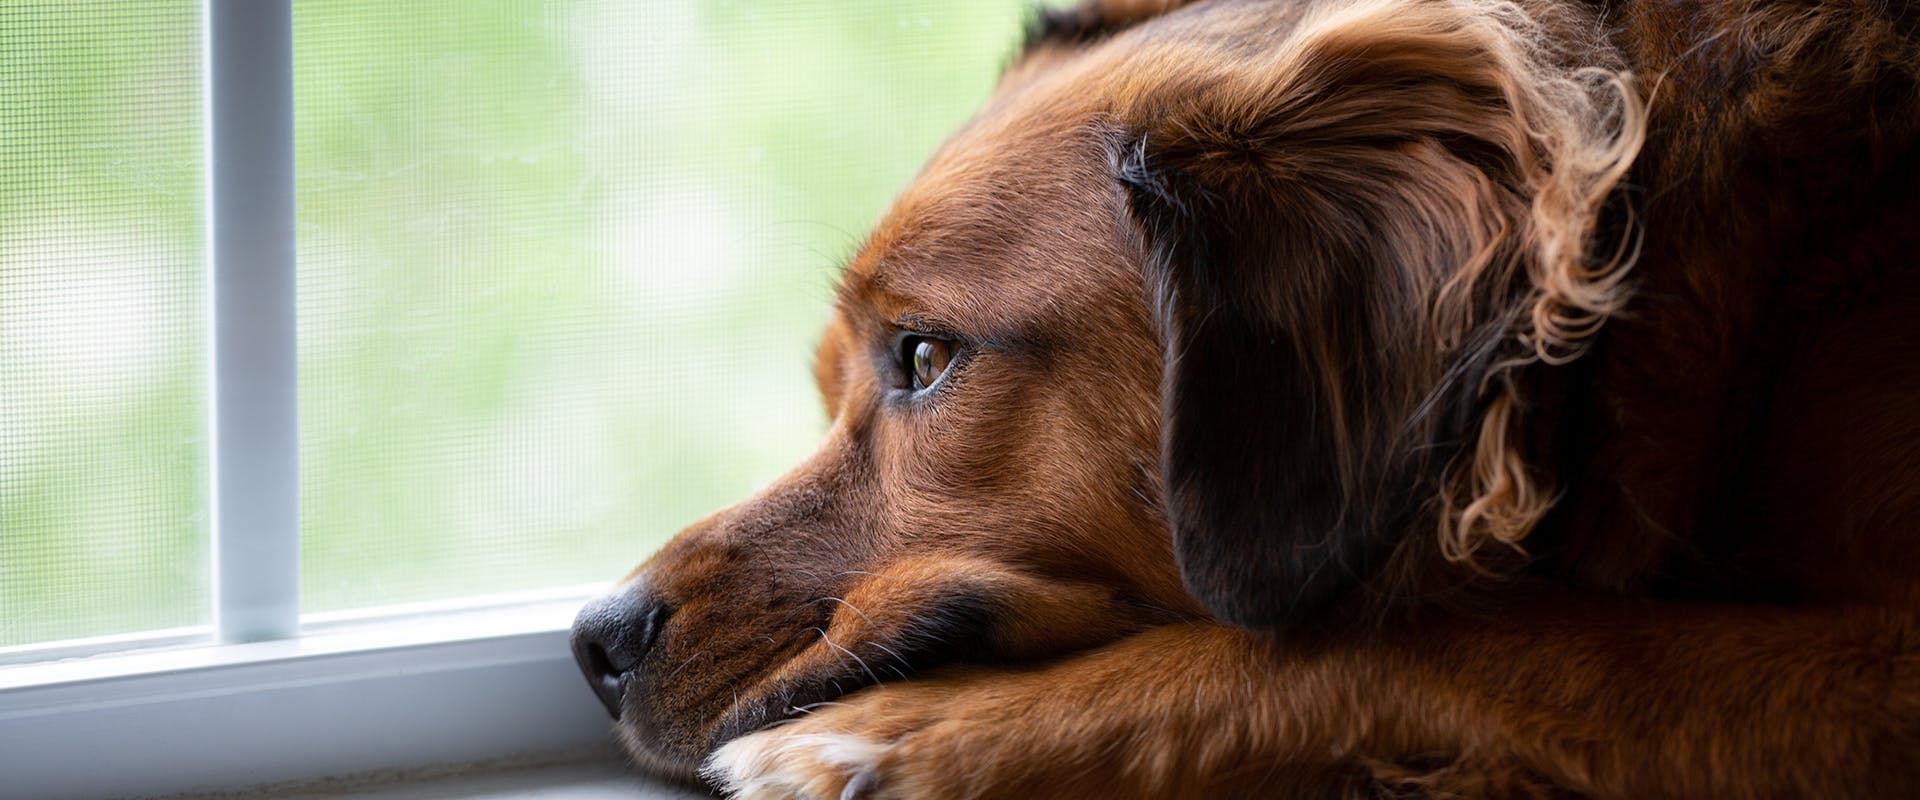 Do dogs get sad? A sad looking dog looking longingly out of the window